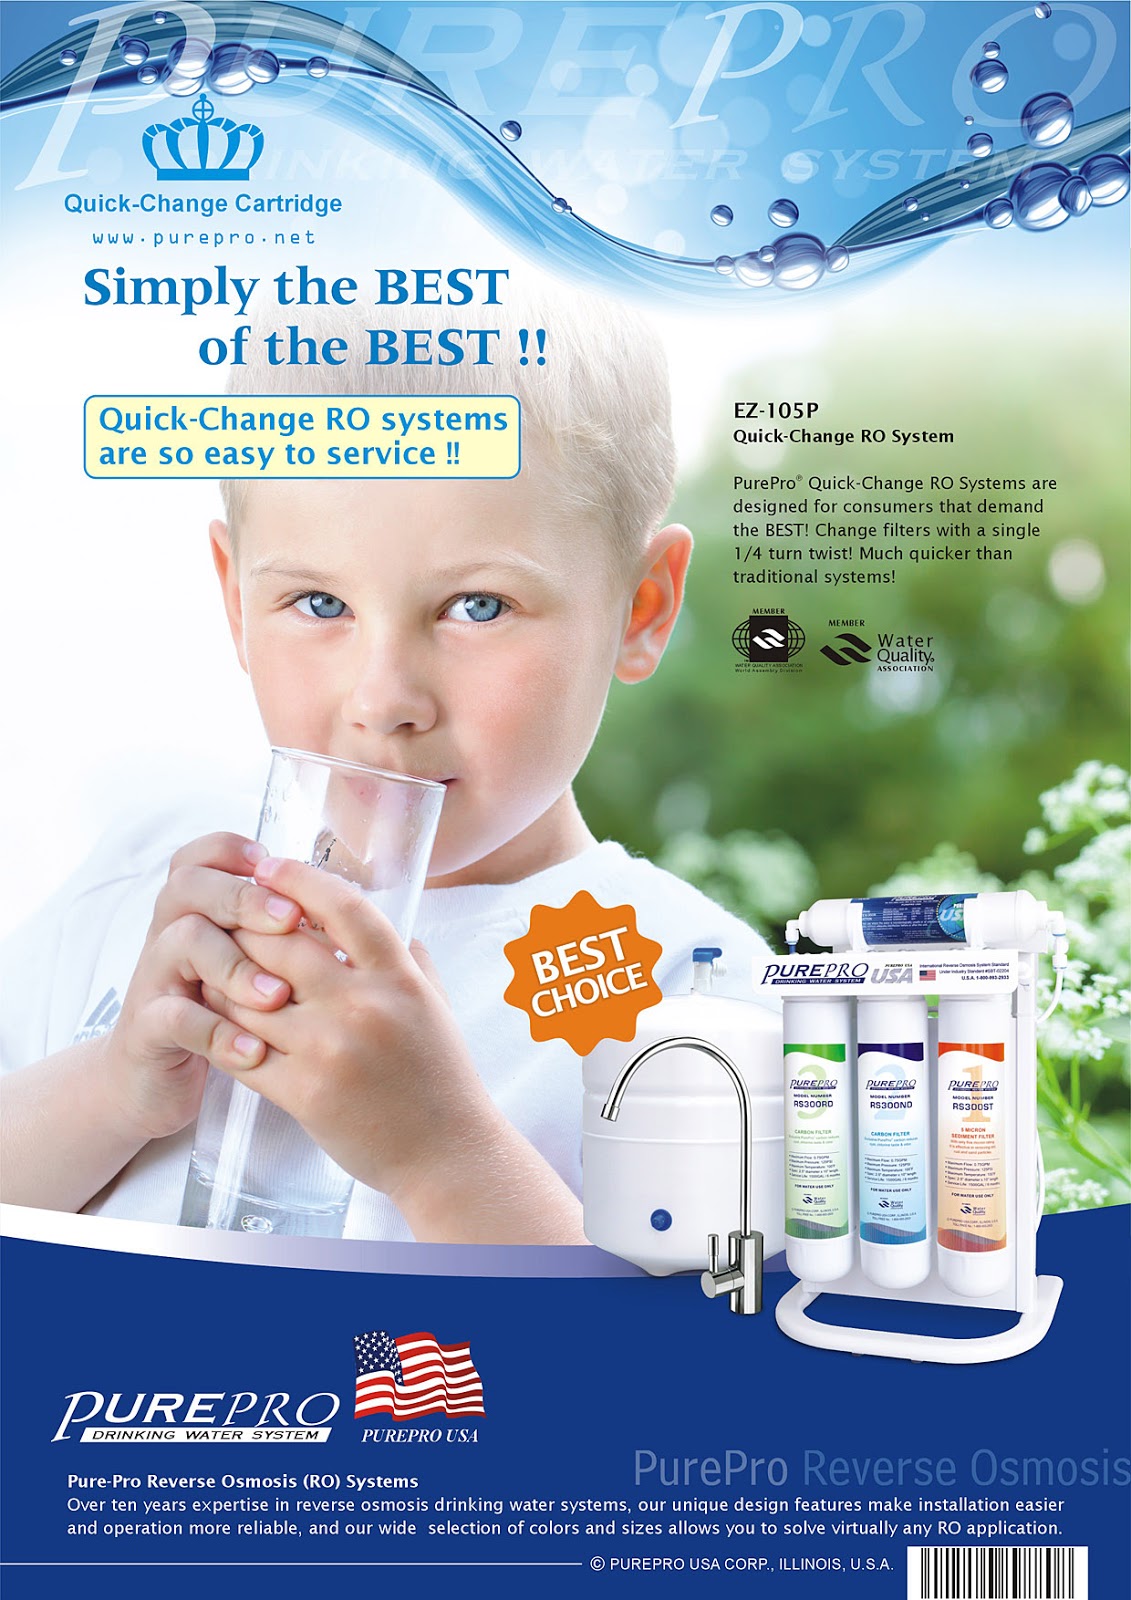 10 Best Reverse Osmosis Filter Systems – (Reviews & Guide 2020)